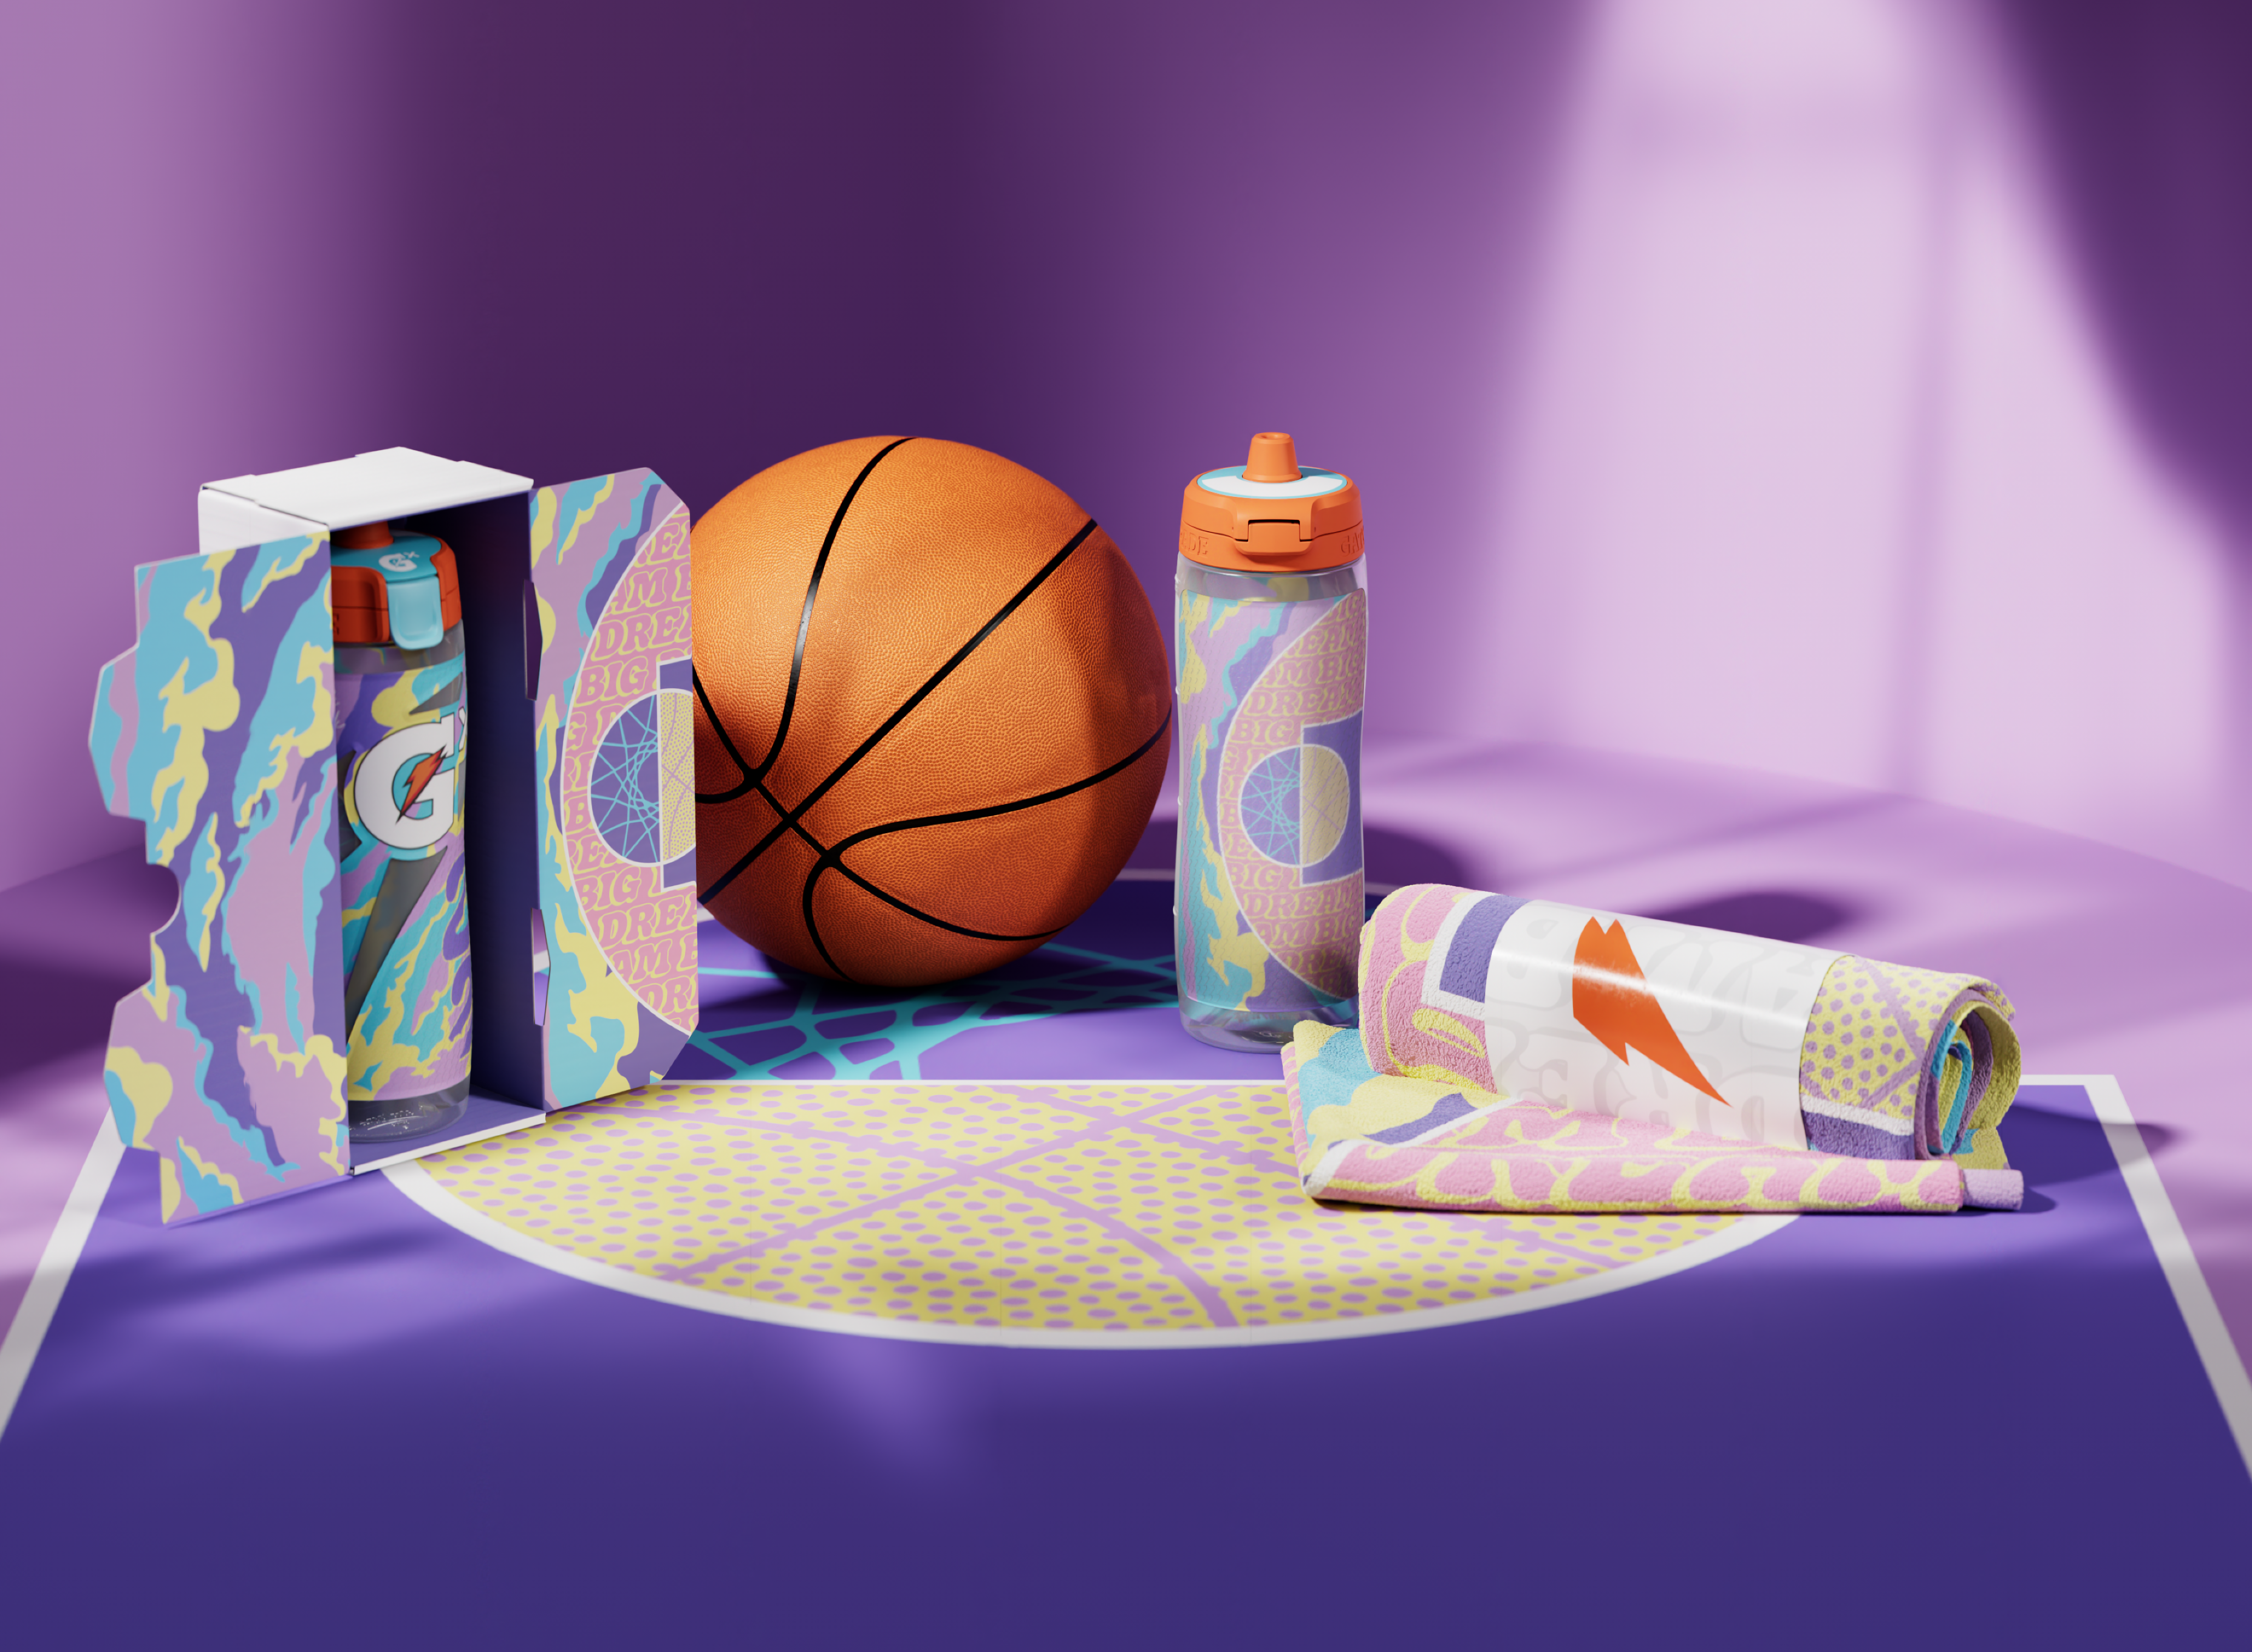 Caitlin Clark collaboration capsule with Gatorade, bottle and towel on basketball court